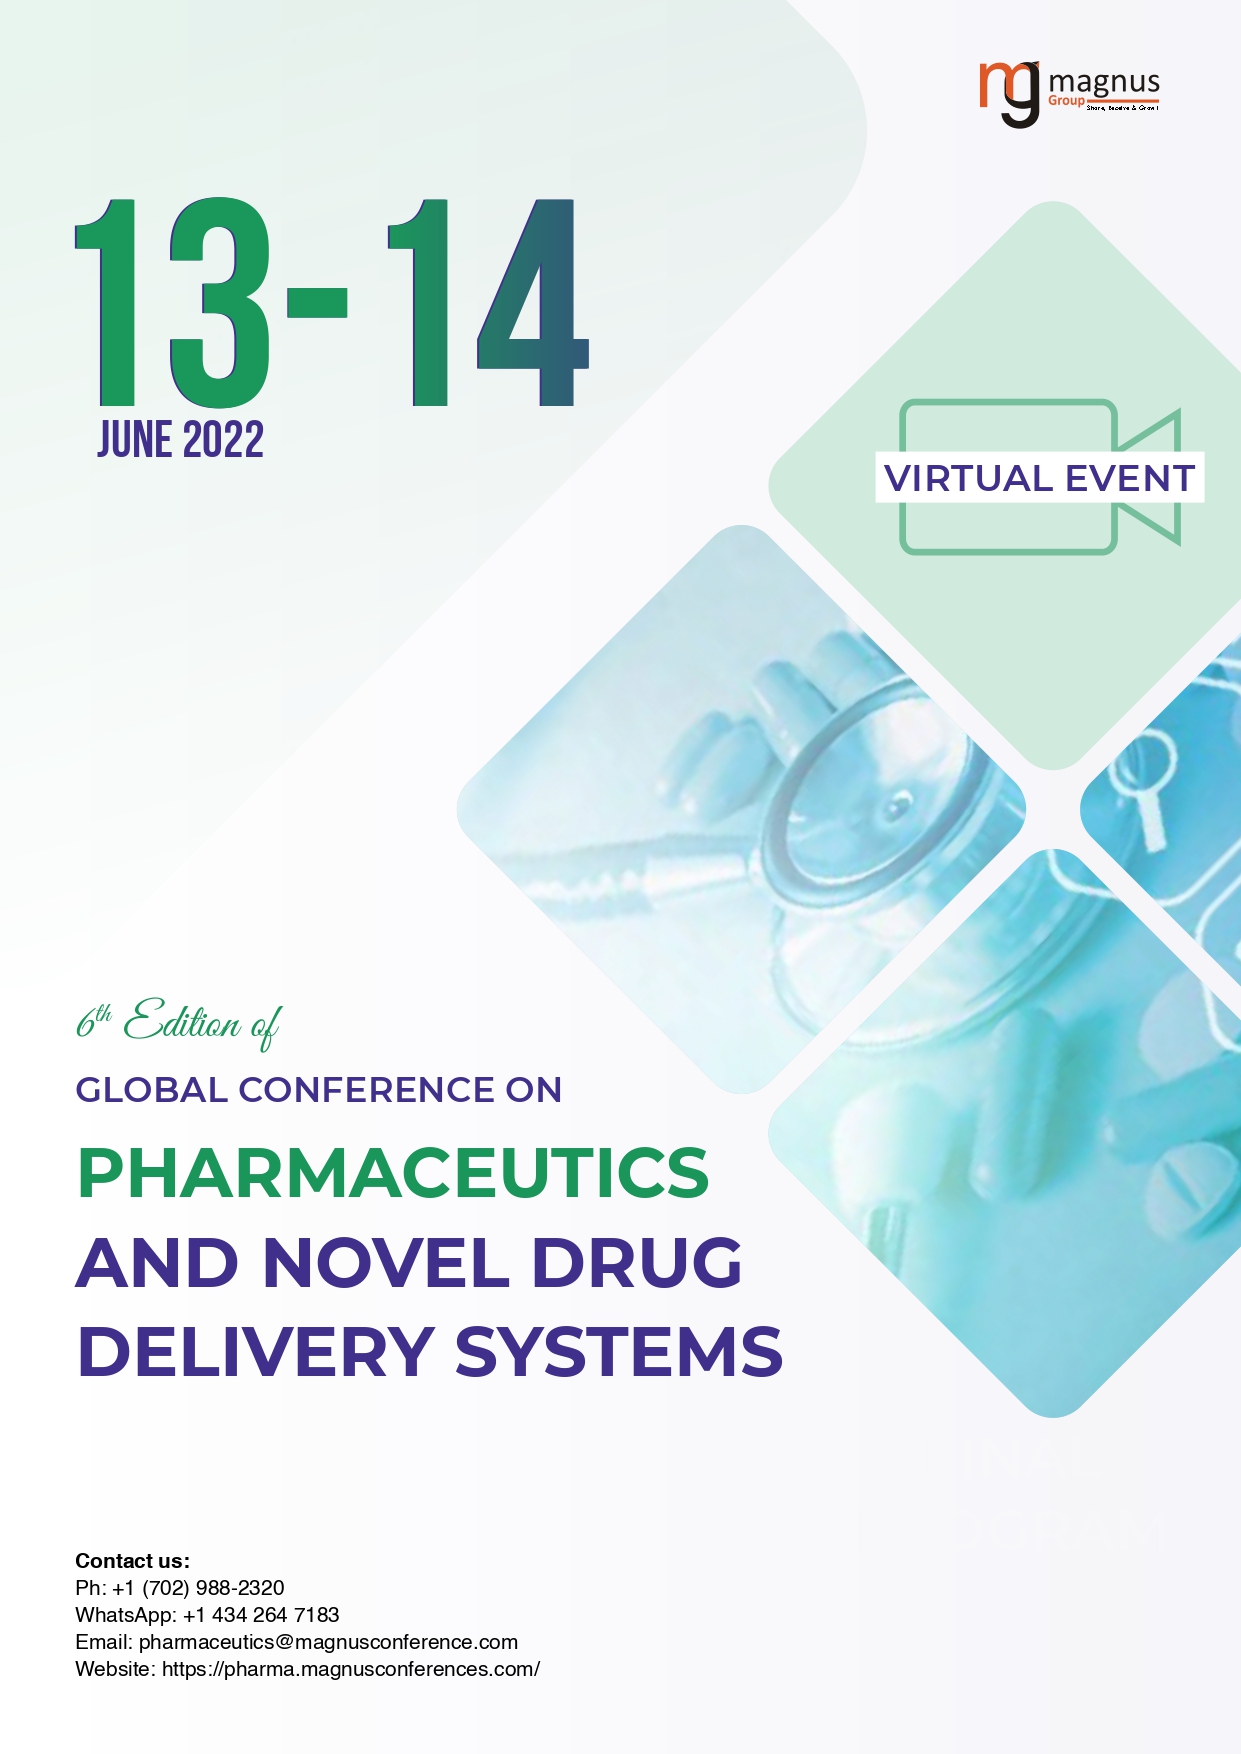 6th Edition of Global Conference on Pharmaceutics and Novel Drug Delivery Systems Program